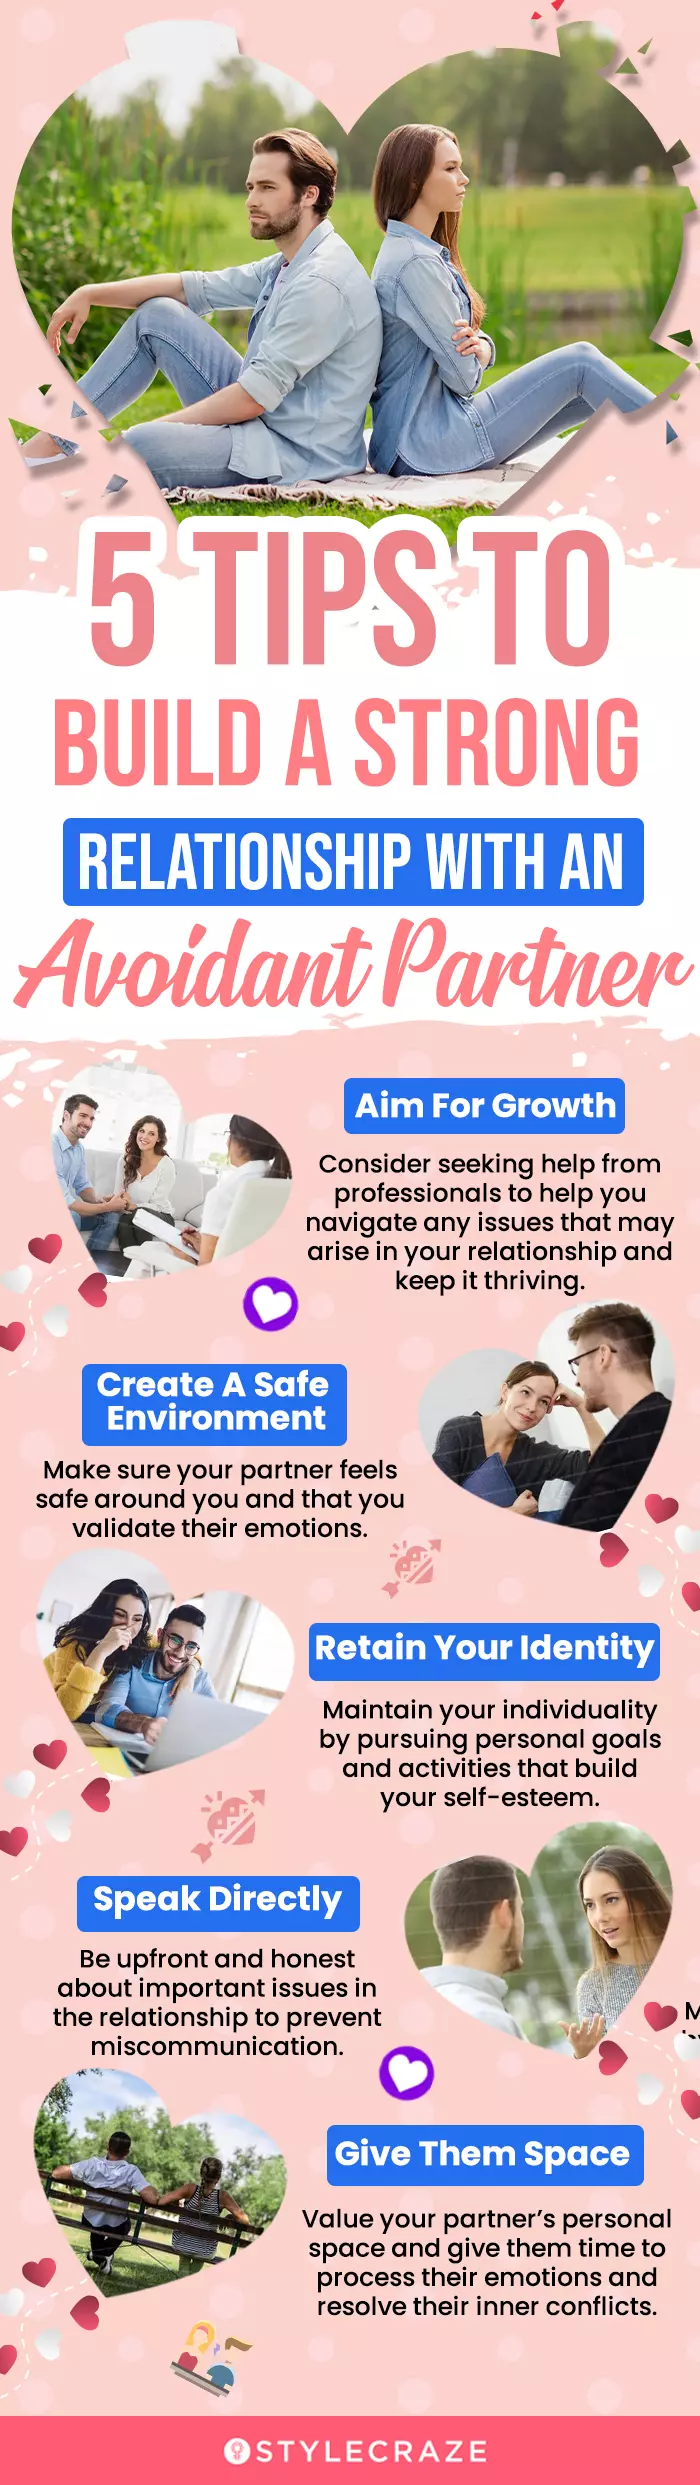 5 tips to build a strong relationship with an avoidant partner (infographic)